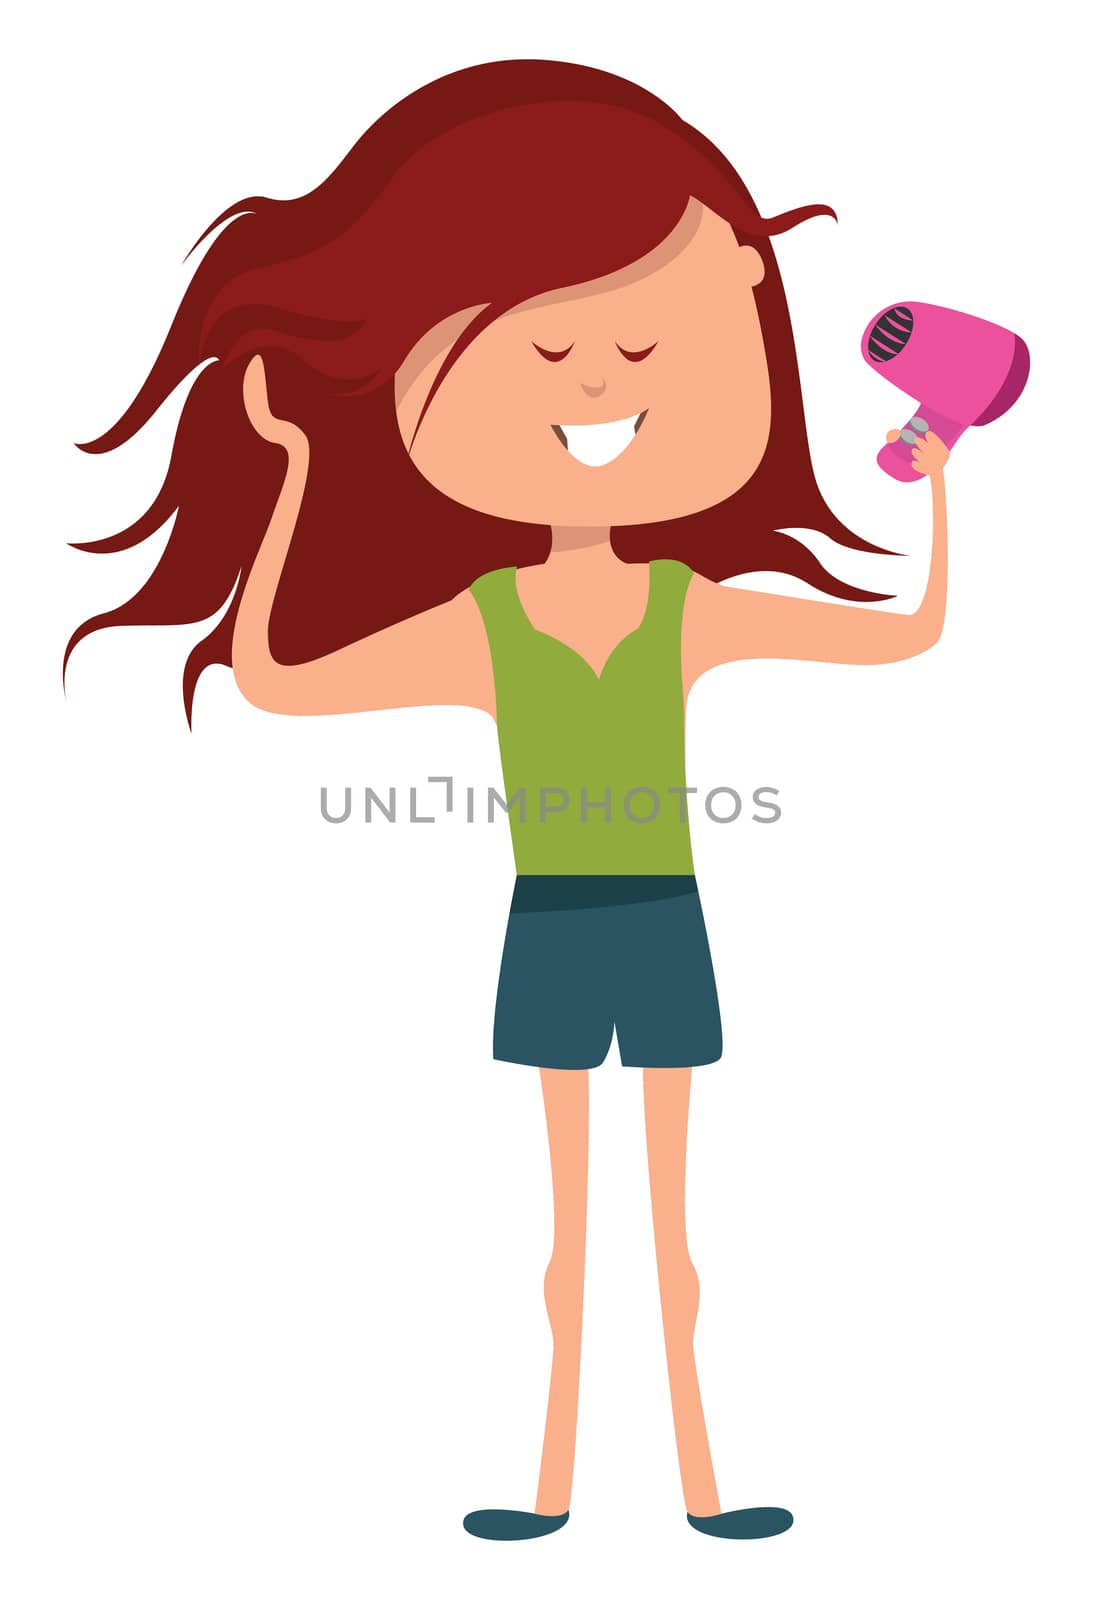 Girl with new hairstyle , illustration, vector on white background